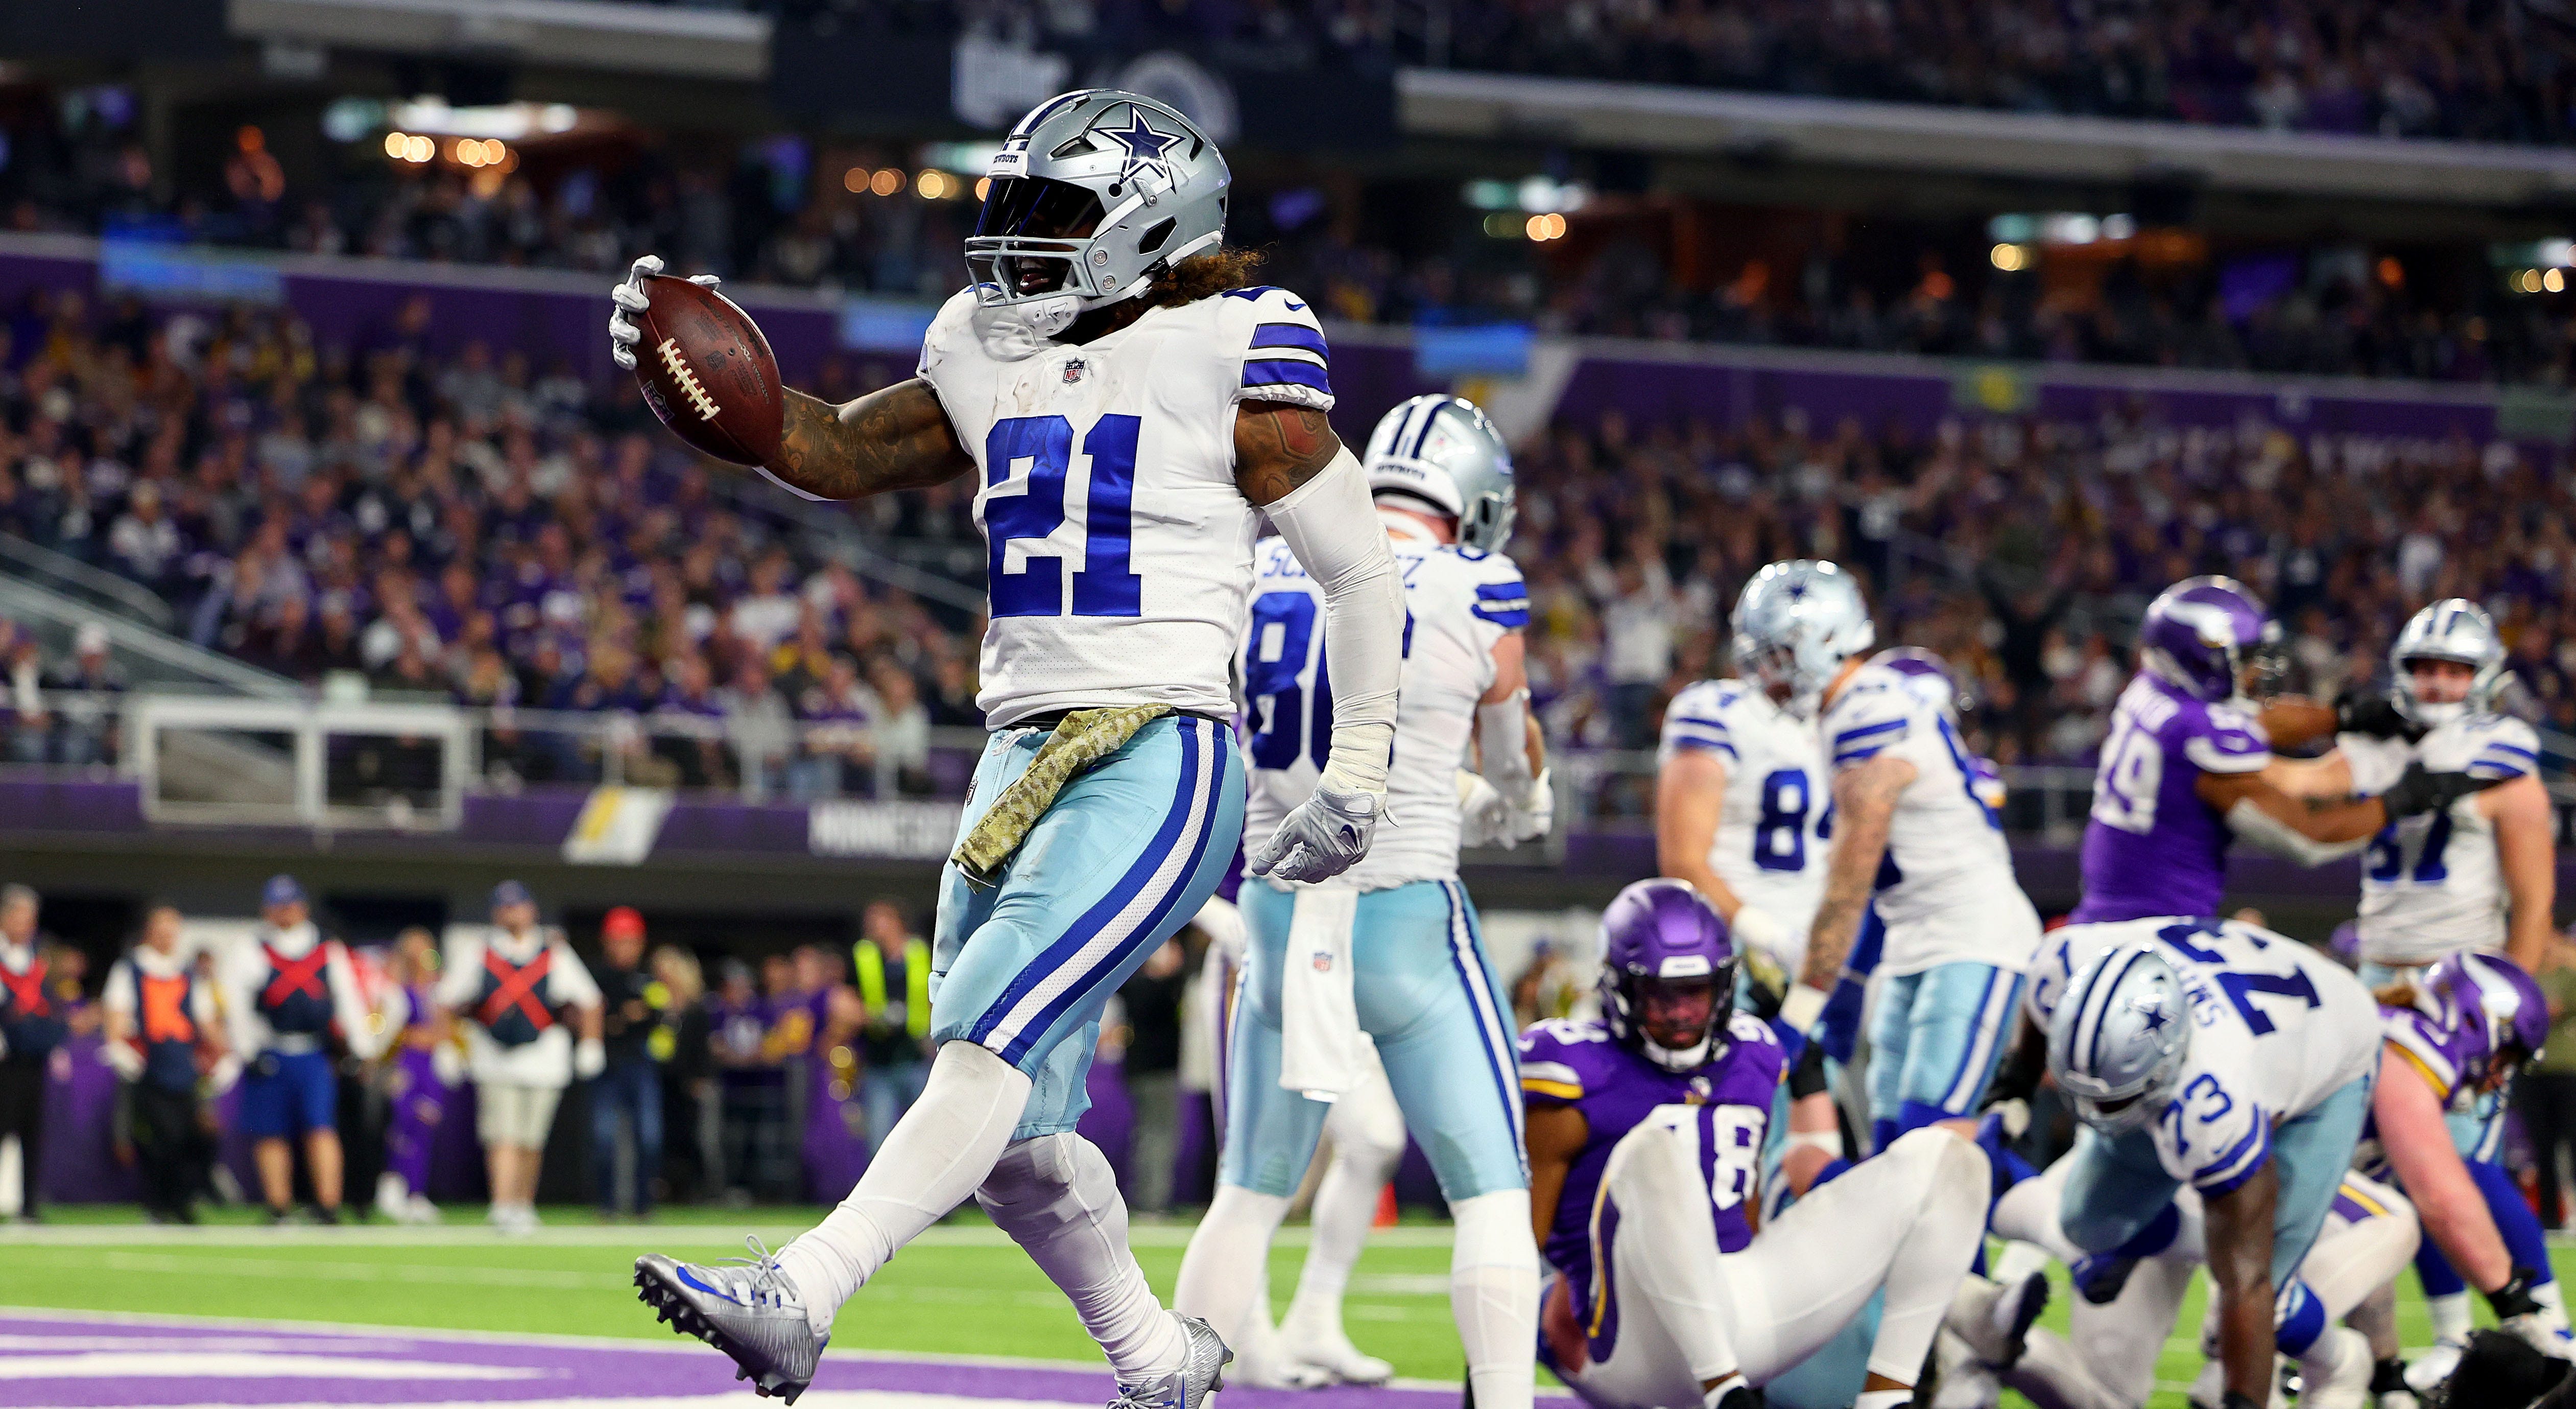 Cowboys beat Vikings so bad CBS cuts broadcast to different game before  final whistle | Fox News